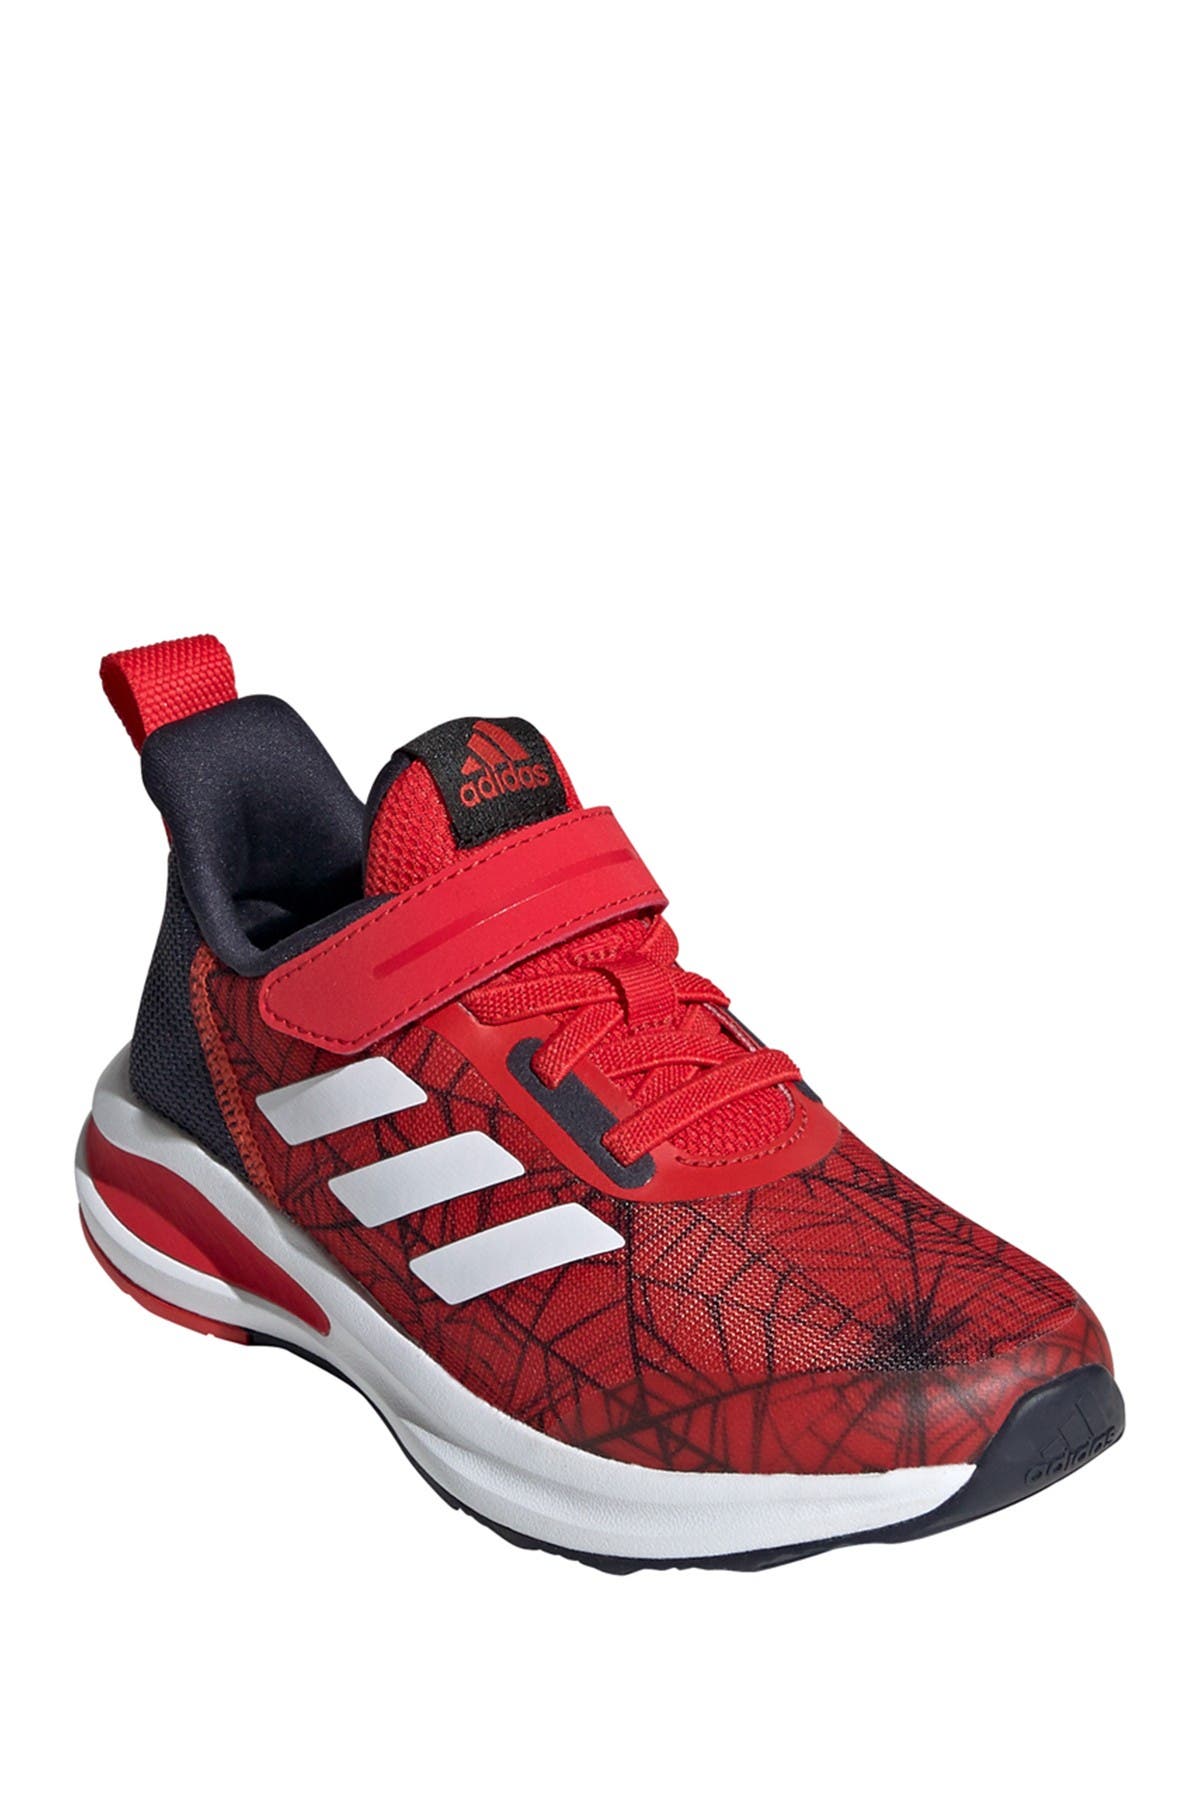 spider man adidas for toddlers